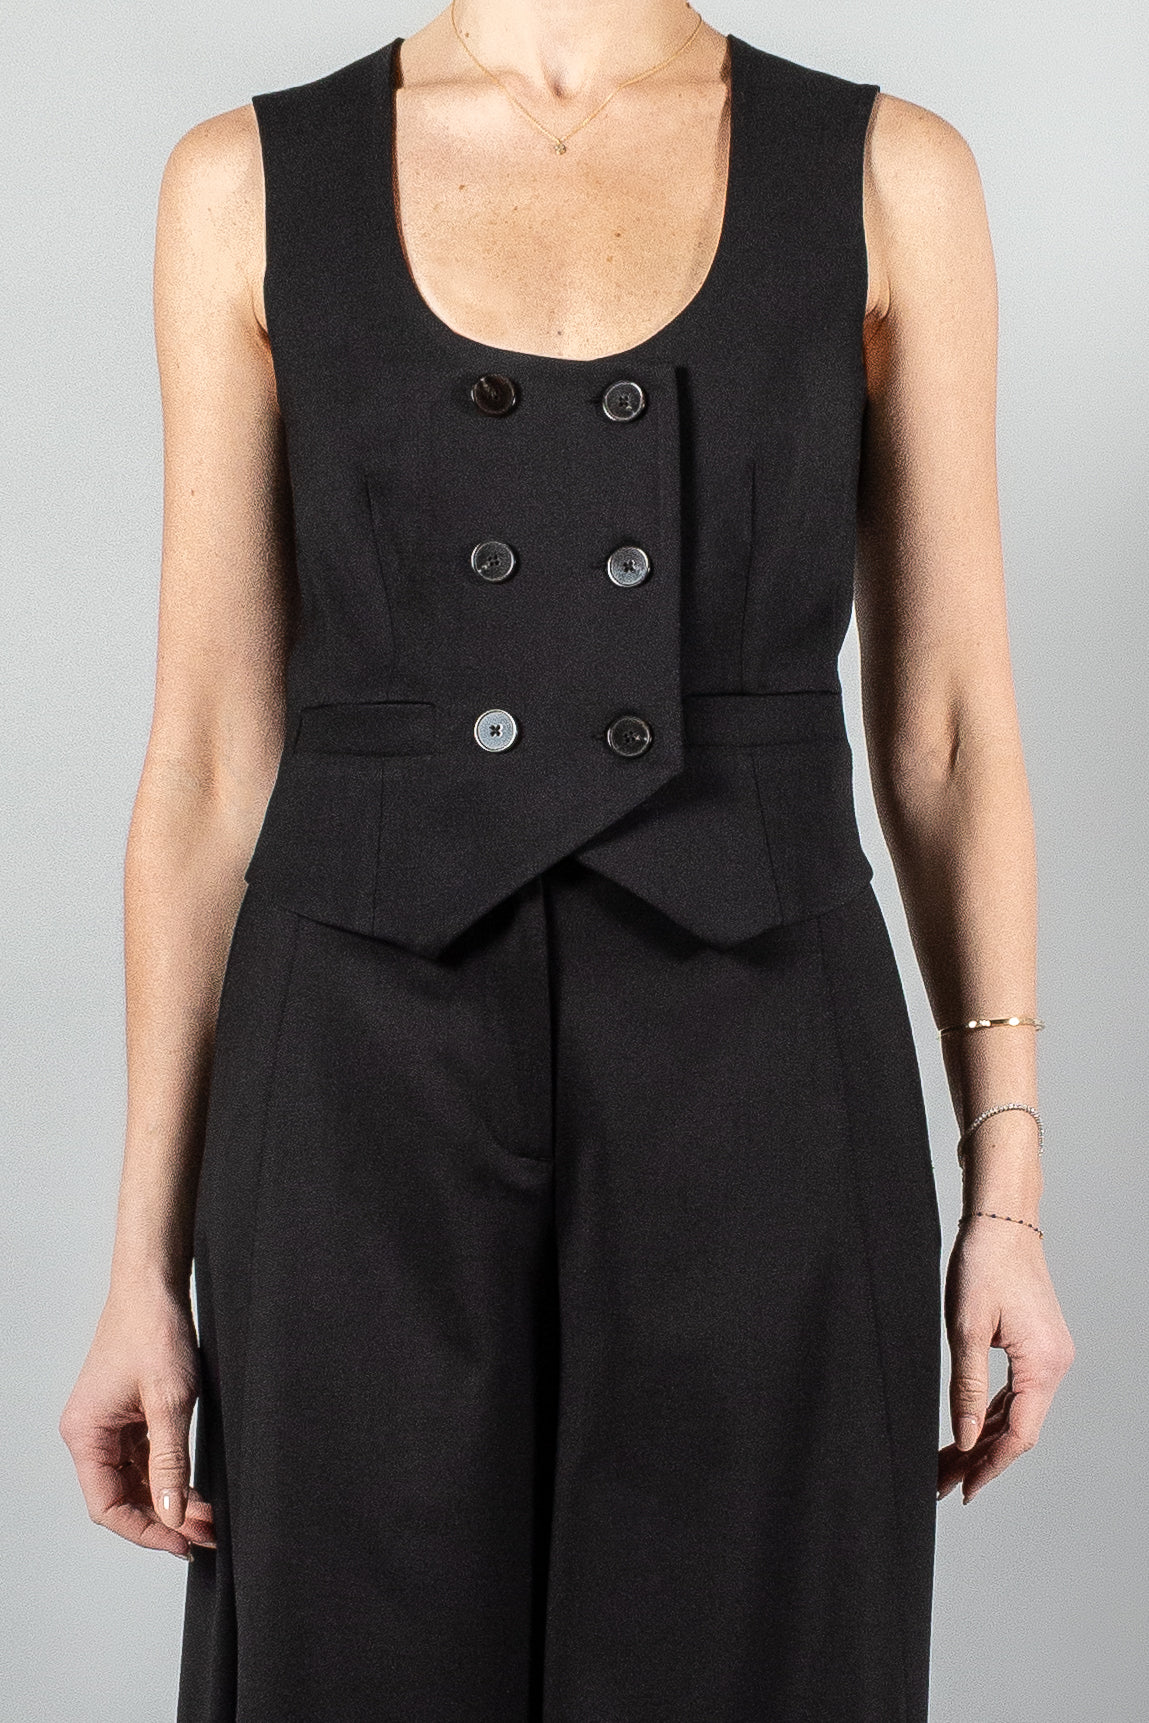 Heirlome Ines Waistcoat-Jackets and Blazers-Misch-Boutique-Vancouver-Canada-misch.ca